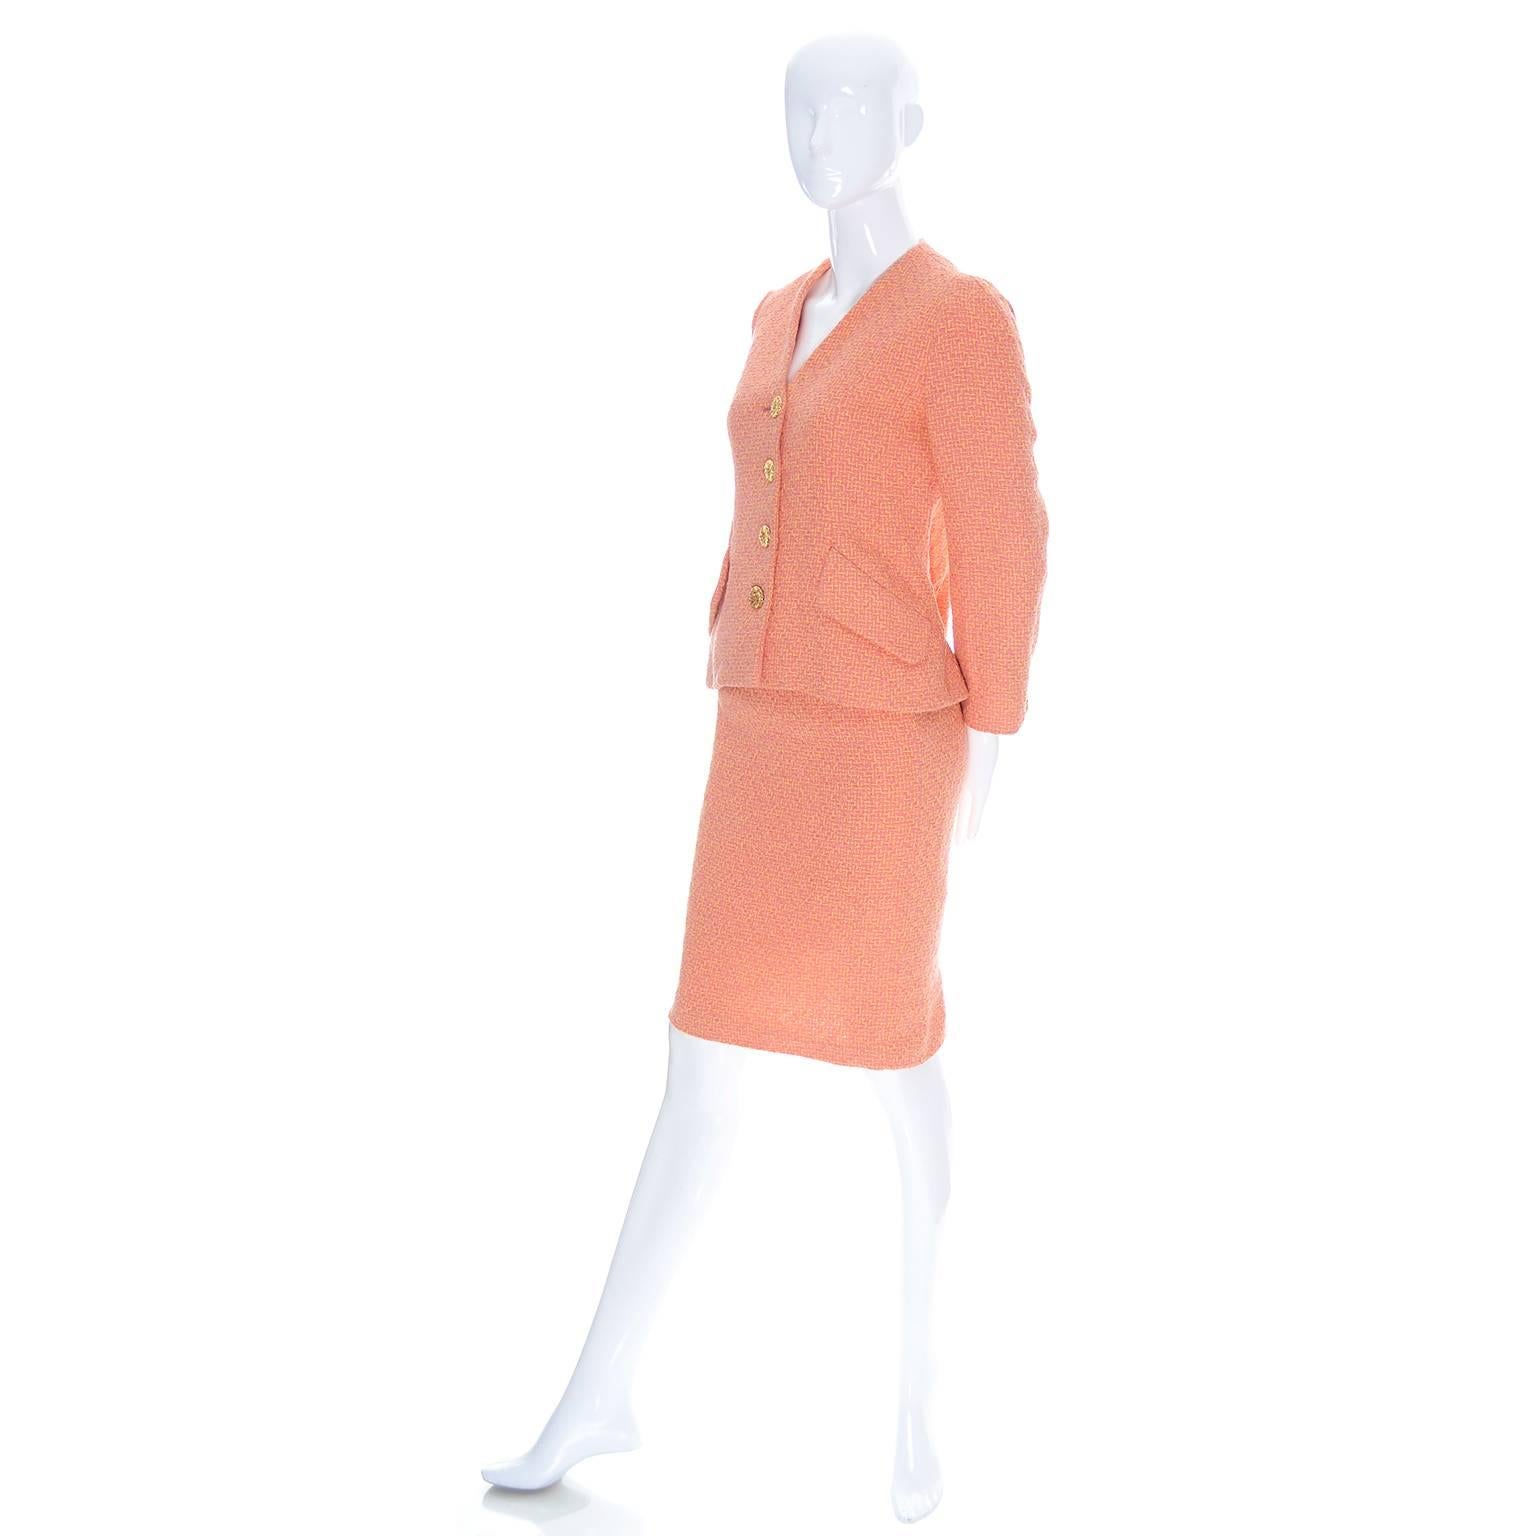 This beautiful designer vintage suit is from Guy Laroche and was made in France.  The suit is in a beautiful Orange, salmon pink, and yellow fine tweed like fabric and is fully lined in the same salmon pink as is in the fabric.  This suit belonged